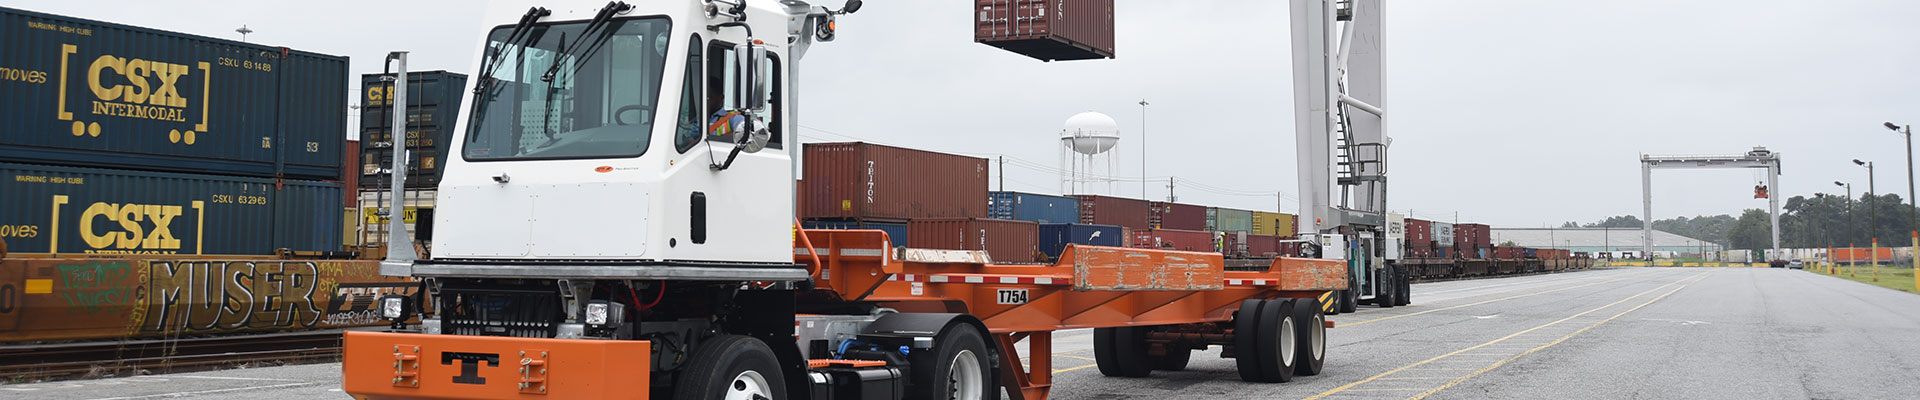 Tico Terminal Tractor working in a port